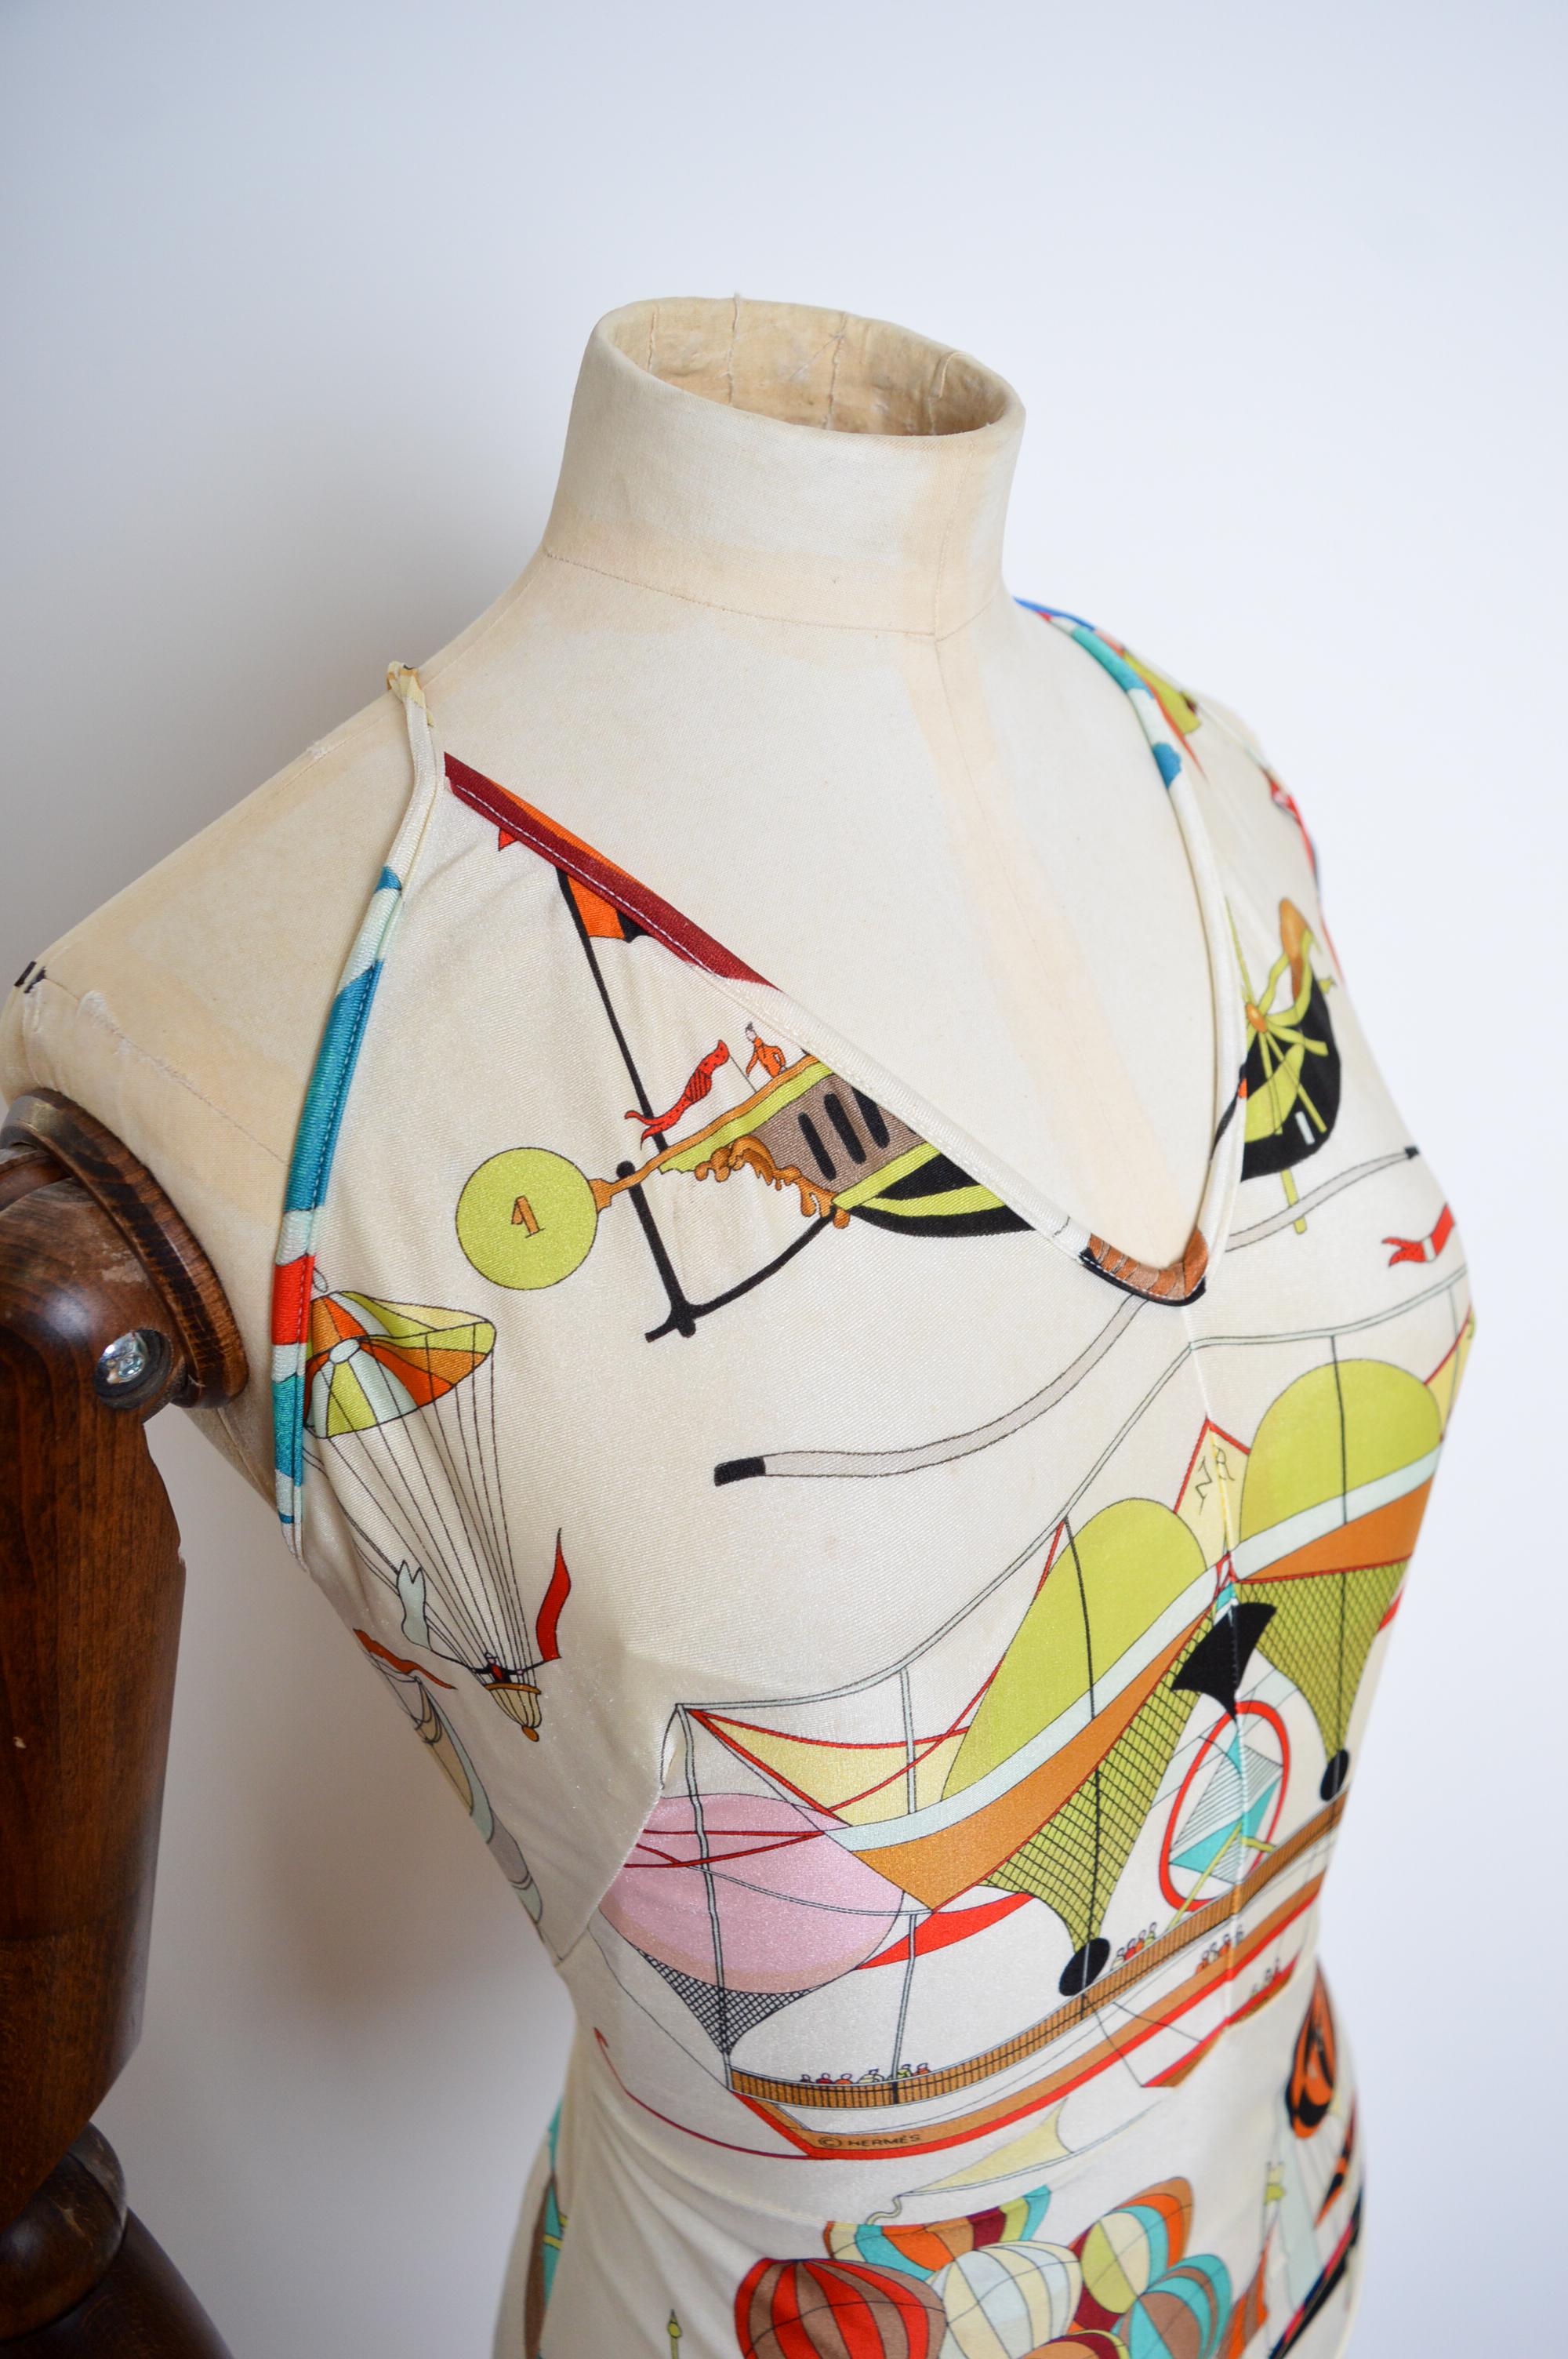 HERMÉS Vintage Bathing Suit - Swimming Costume Hot Air Balloon Patterned Print In Fair Condition For Sale In Sheffield, GB